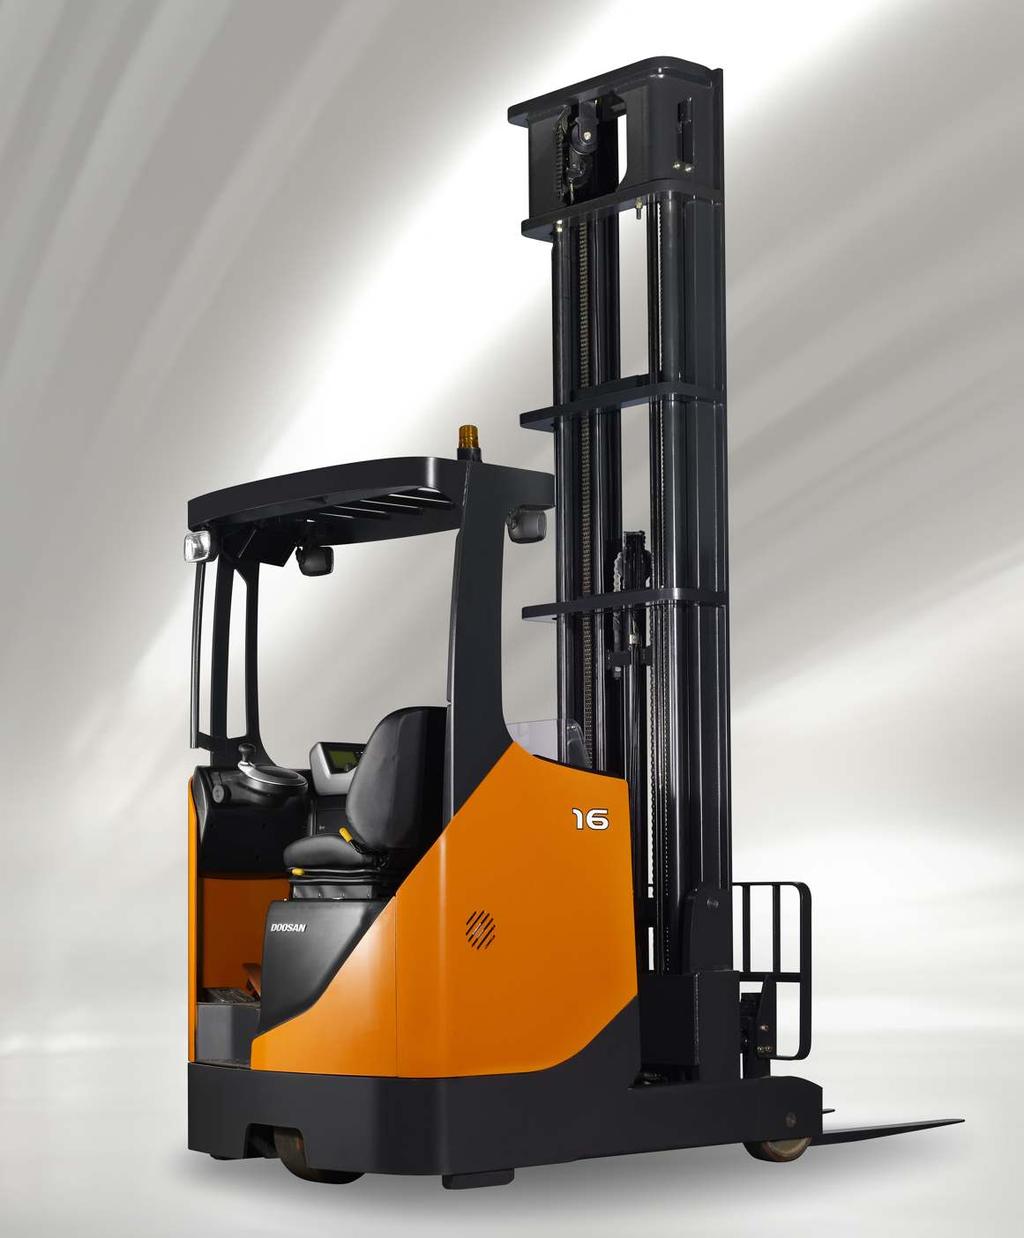 Safety and Innovation Safety lies at the forefront of all of Doosan new products and none more so than the new 7-Series Reach Truck.